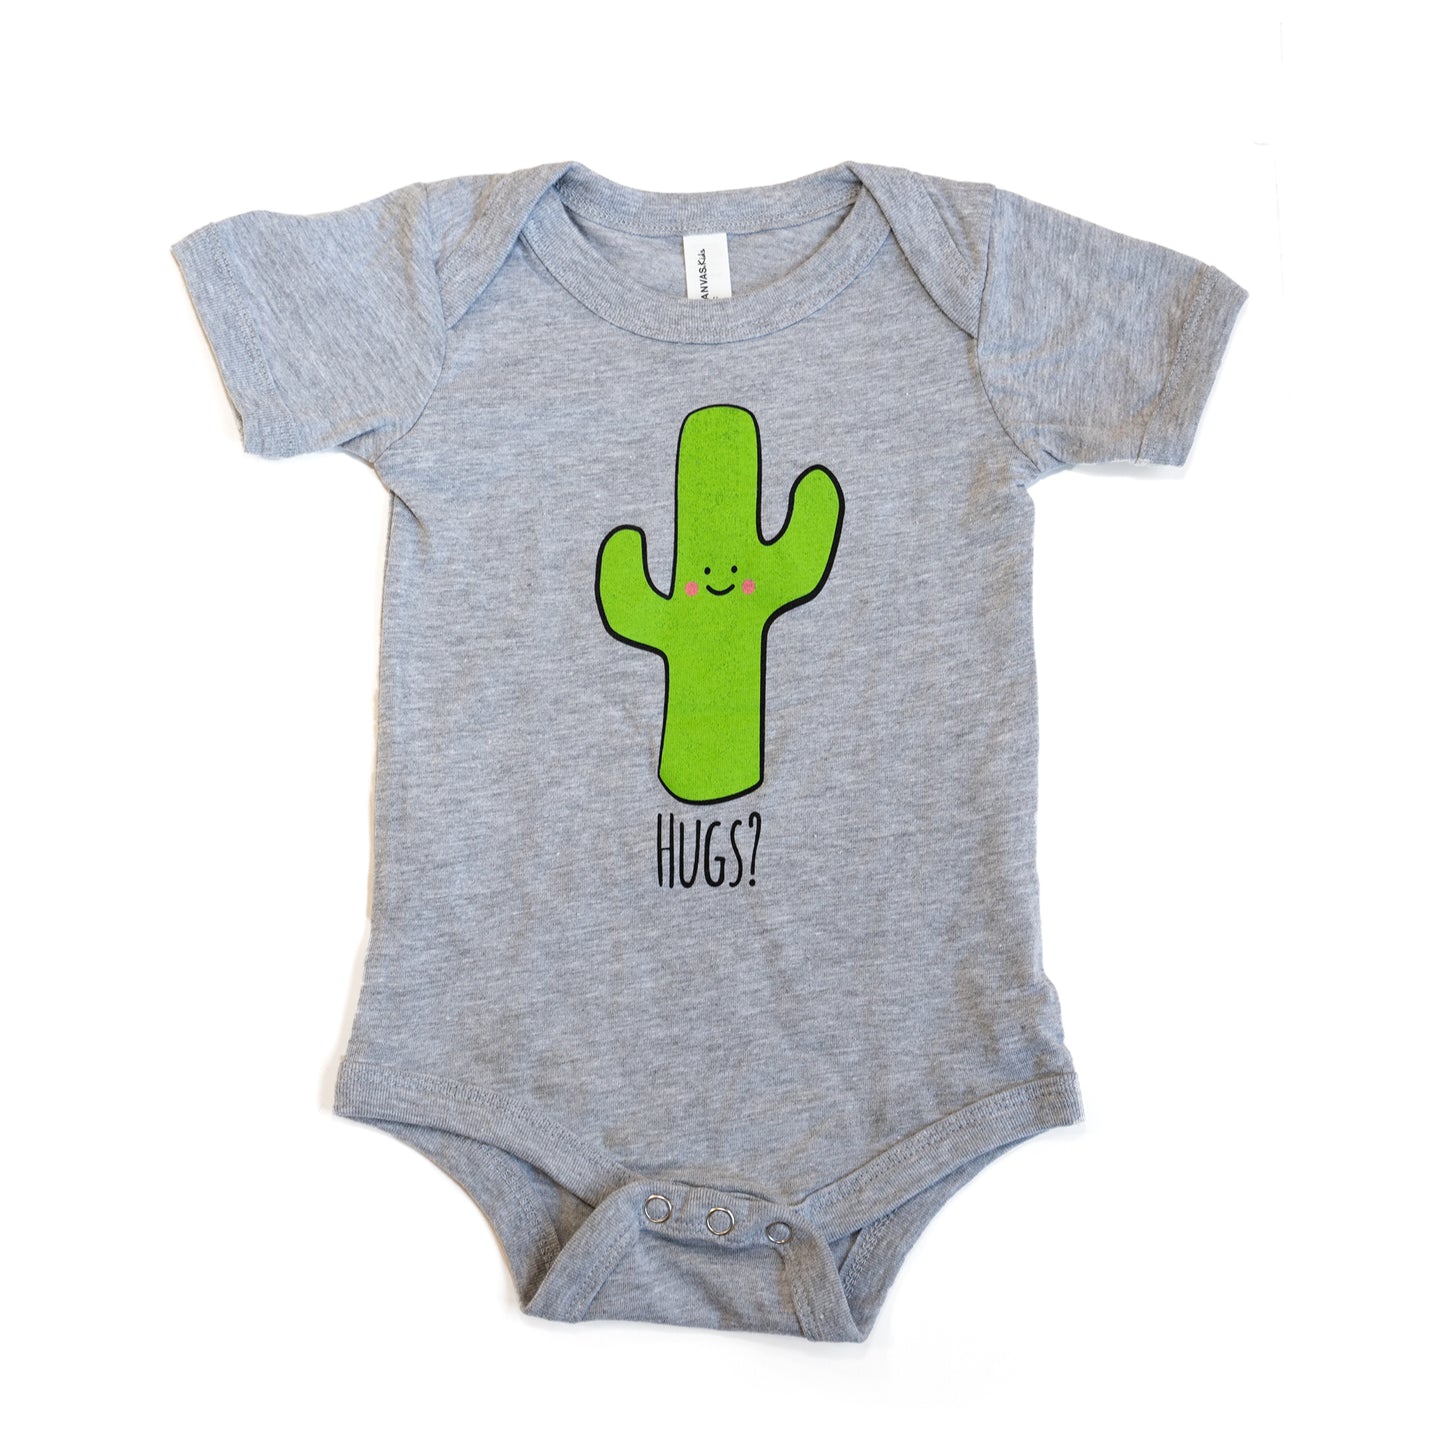 Hugs? Baby Infant One Piece